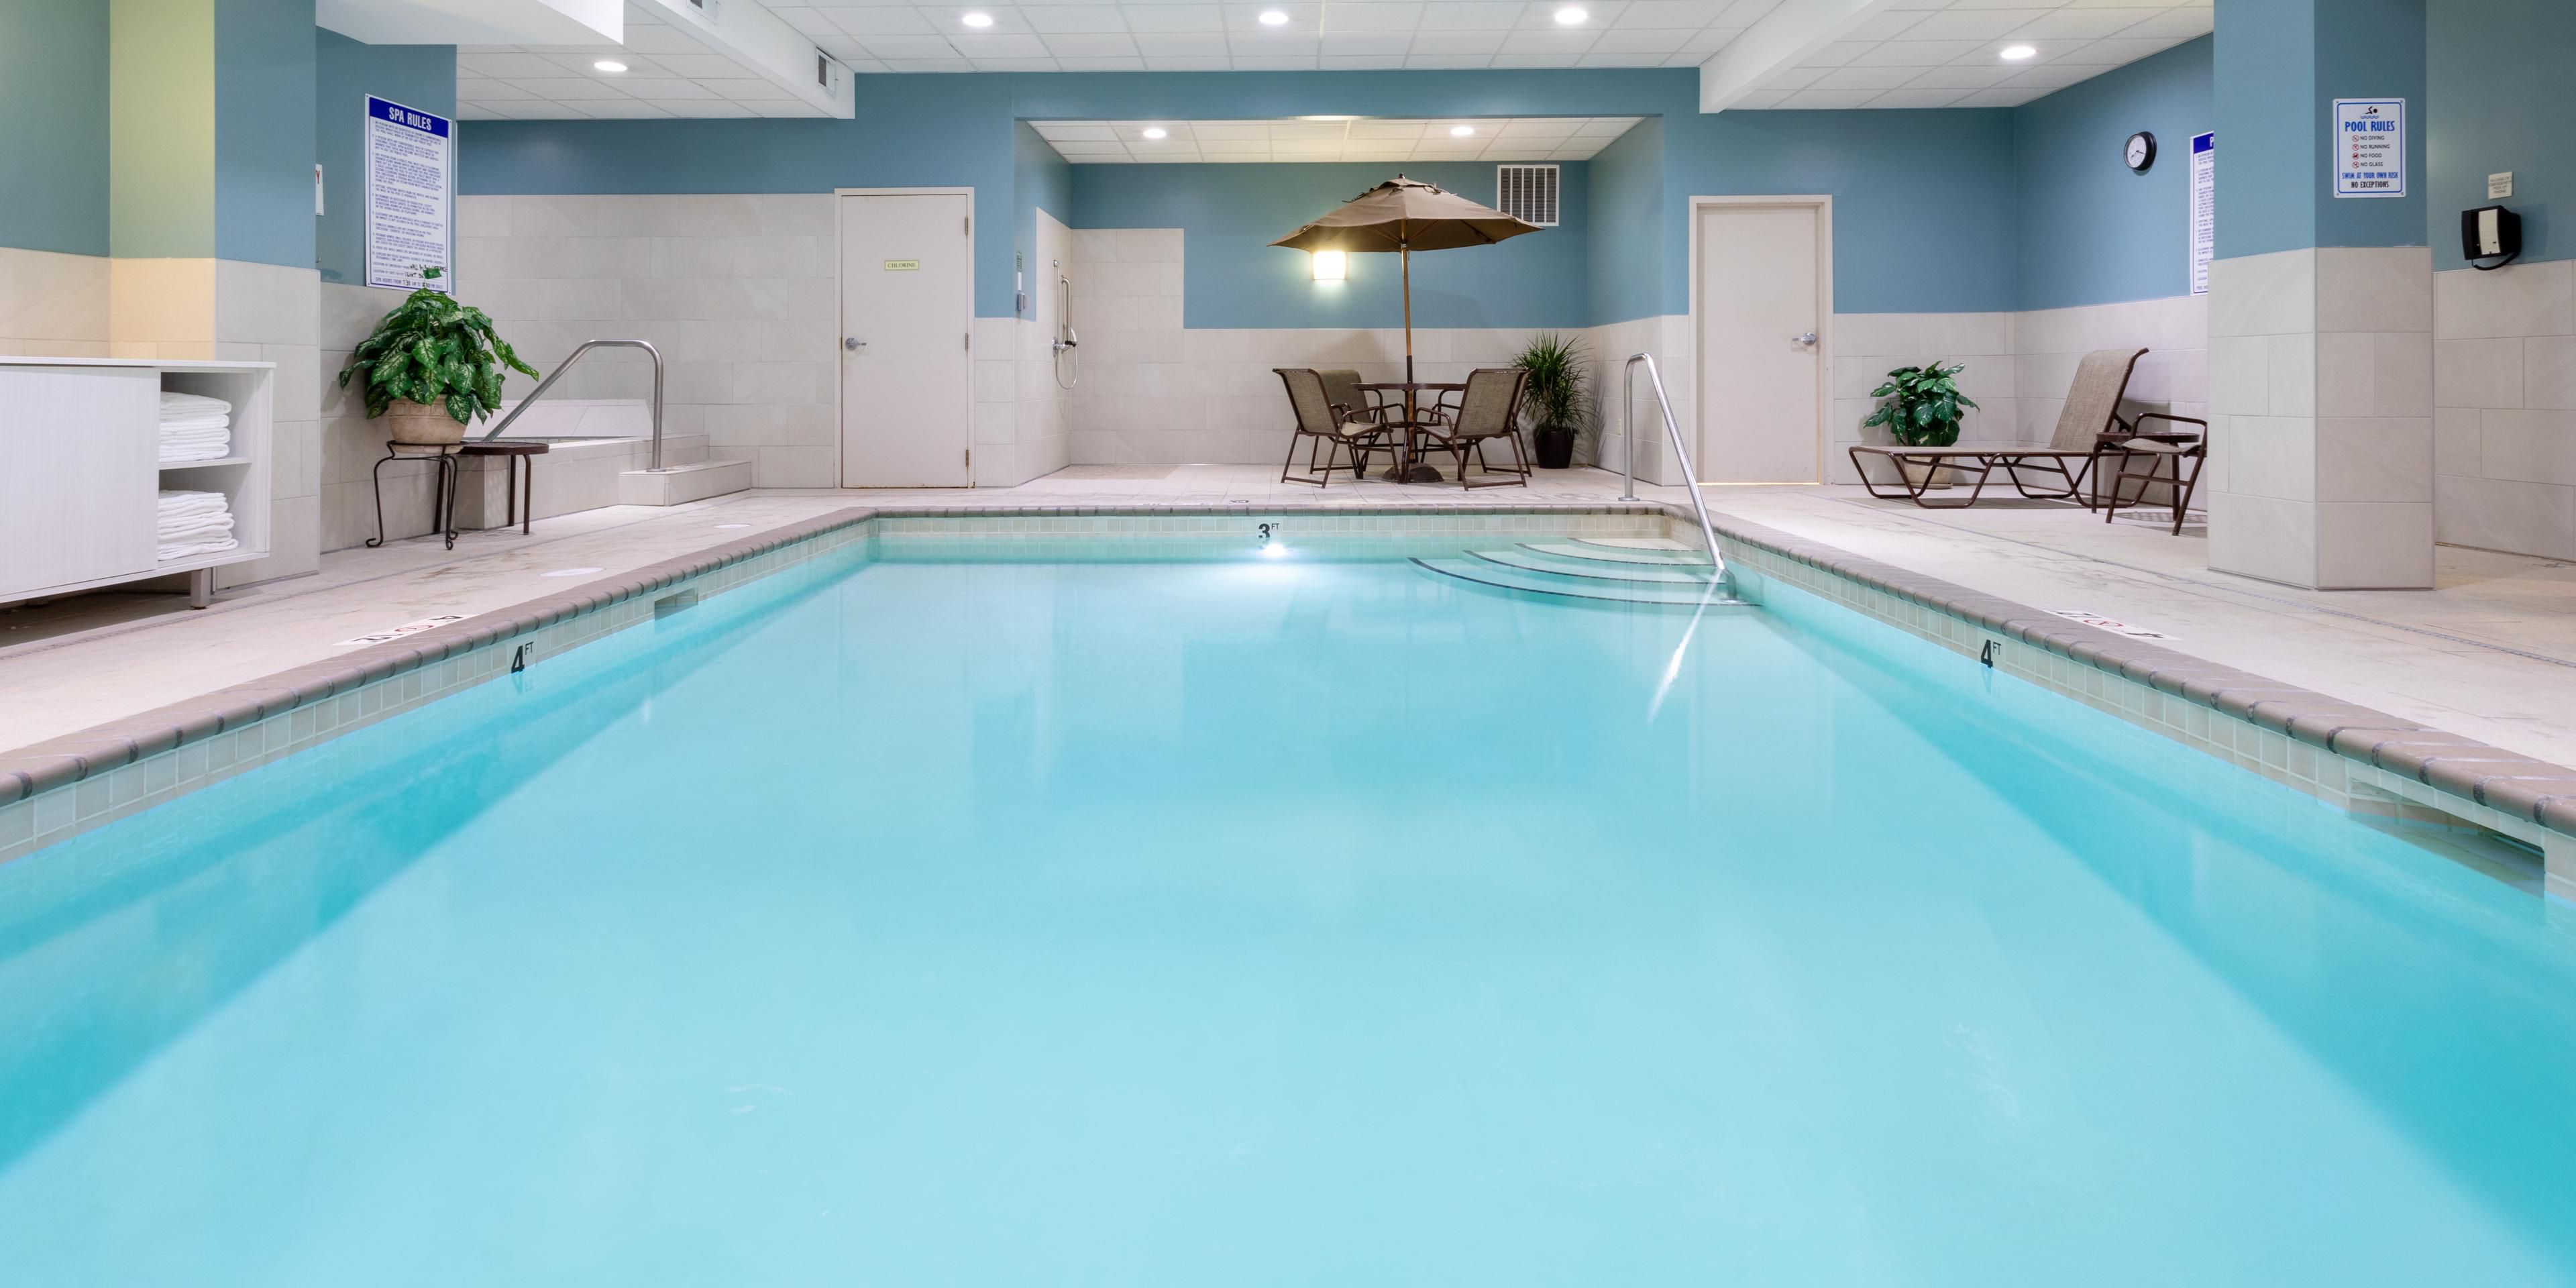 Our indoor heated pool is a favorite of kids and families. 
Take a swim or relax in the hot tub.